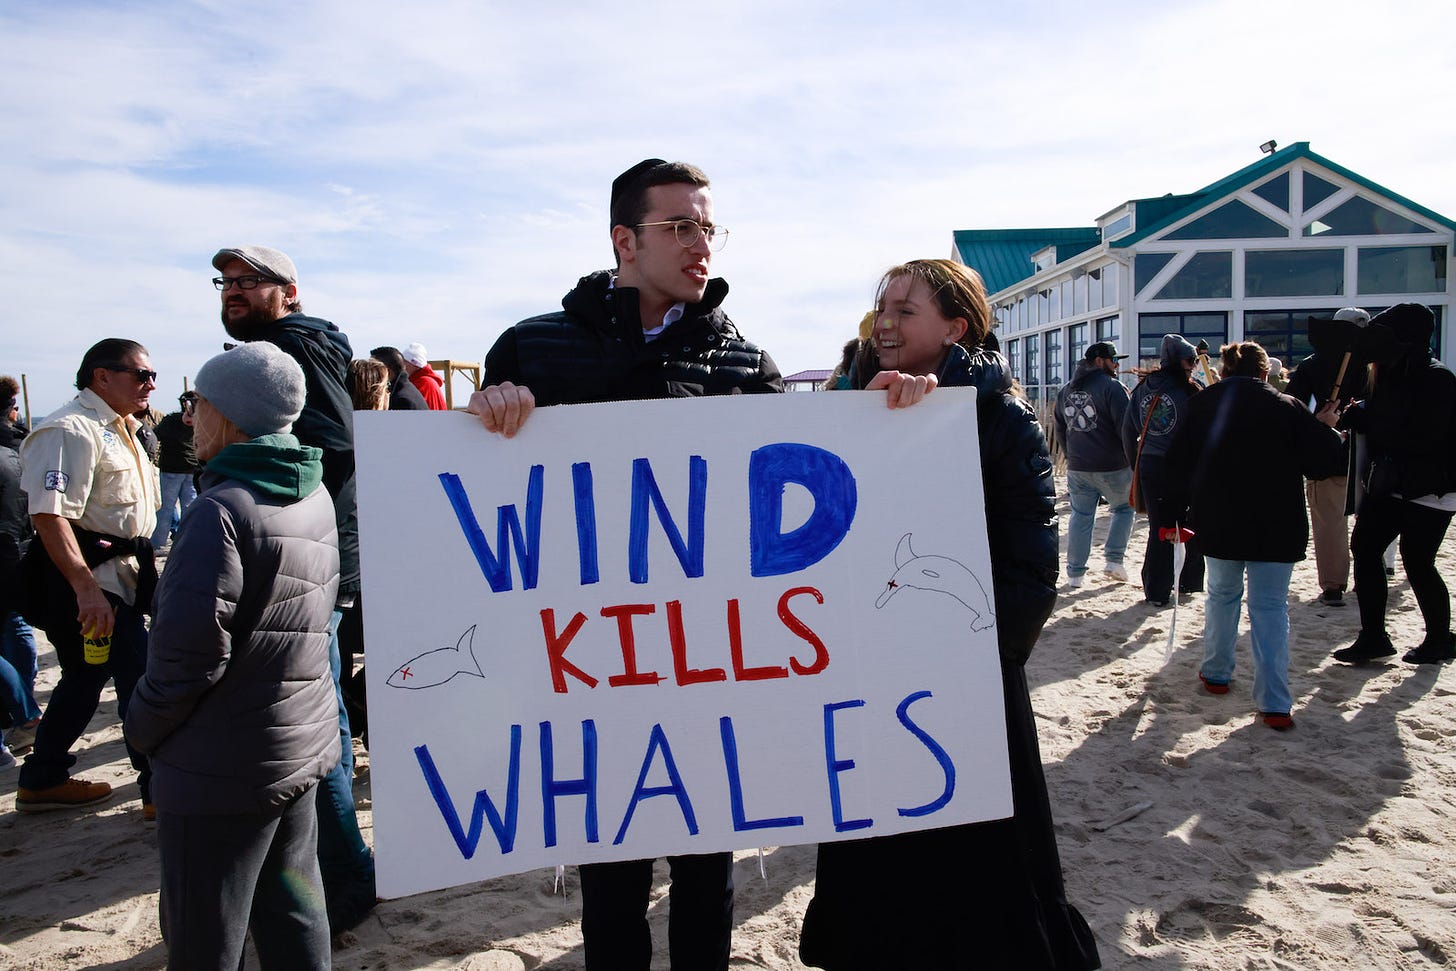 A man wearing glasses and a black jacket stands on a beach holding a hand-written poster that says "Wind Kills Whales." There is a crowd of people around him, looking away from the camera.